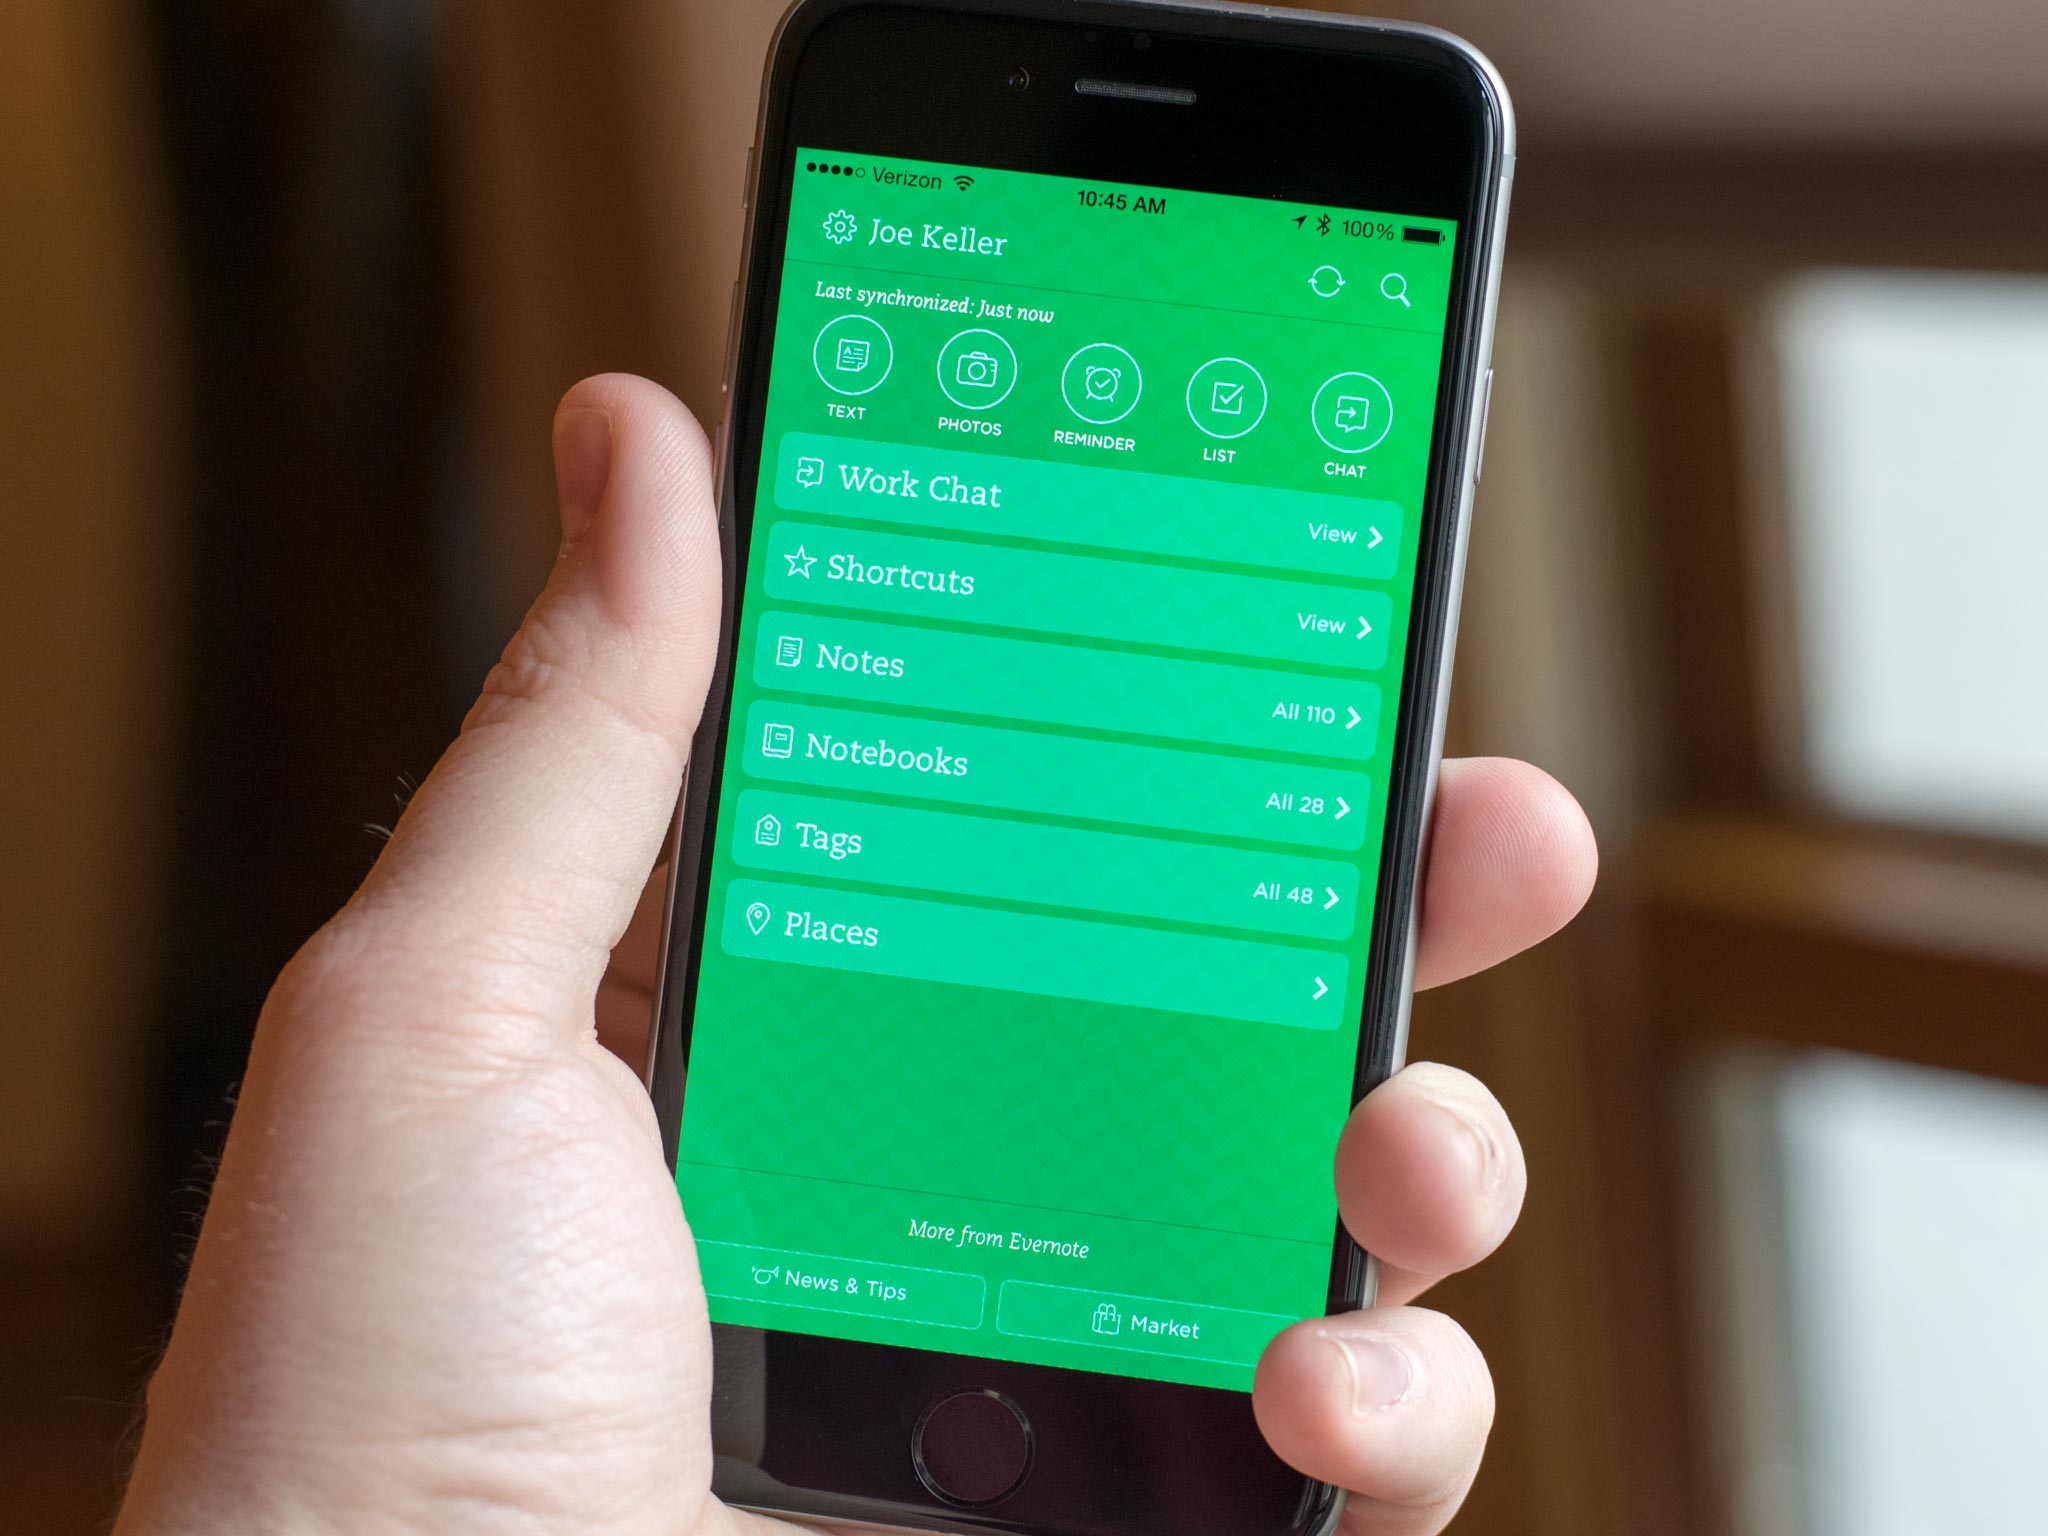 Evernote for iPhone and iPad will now automatically find and scan your physical documents